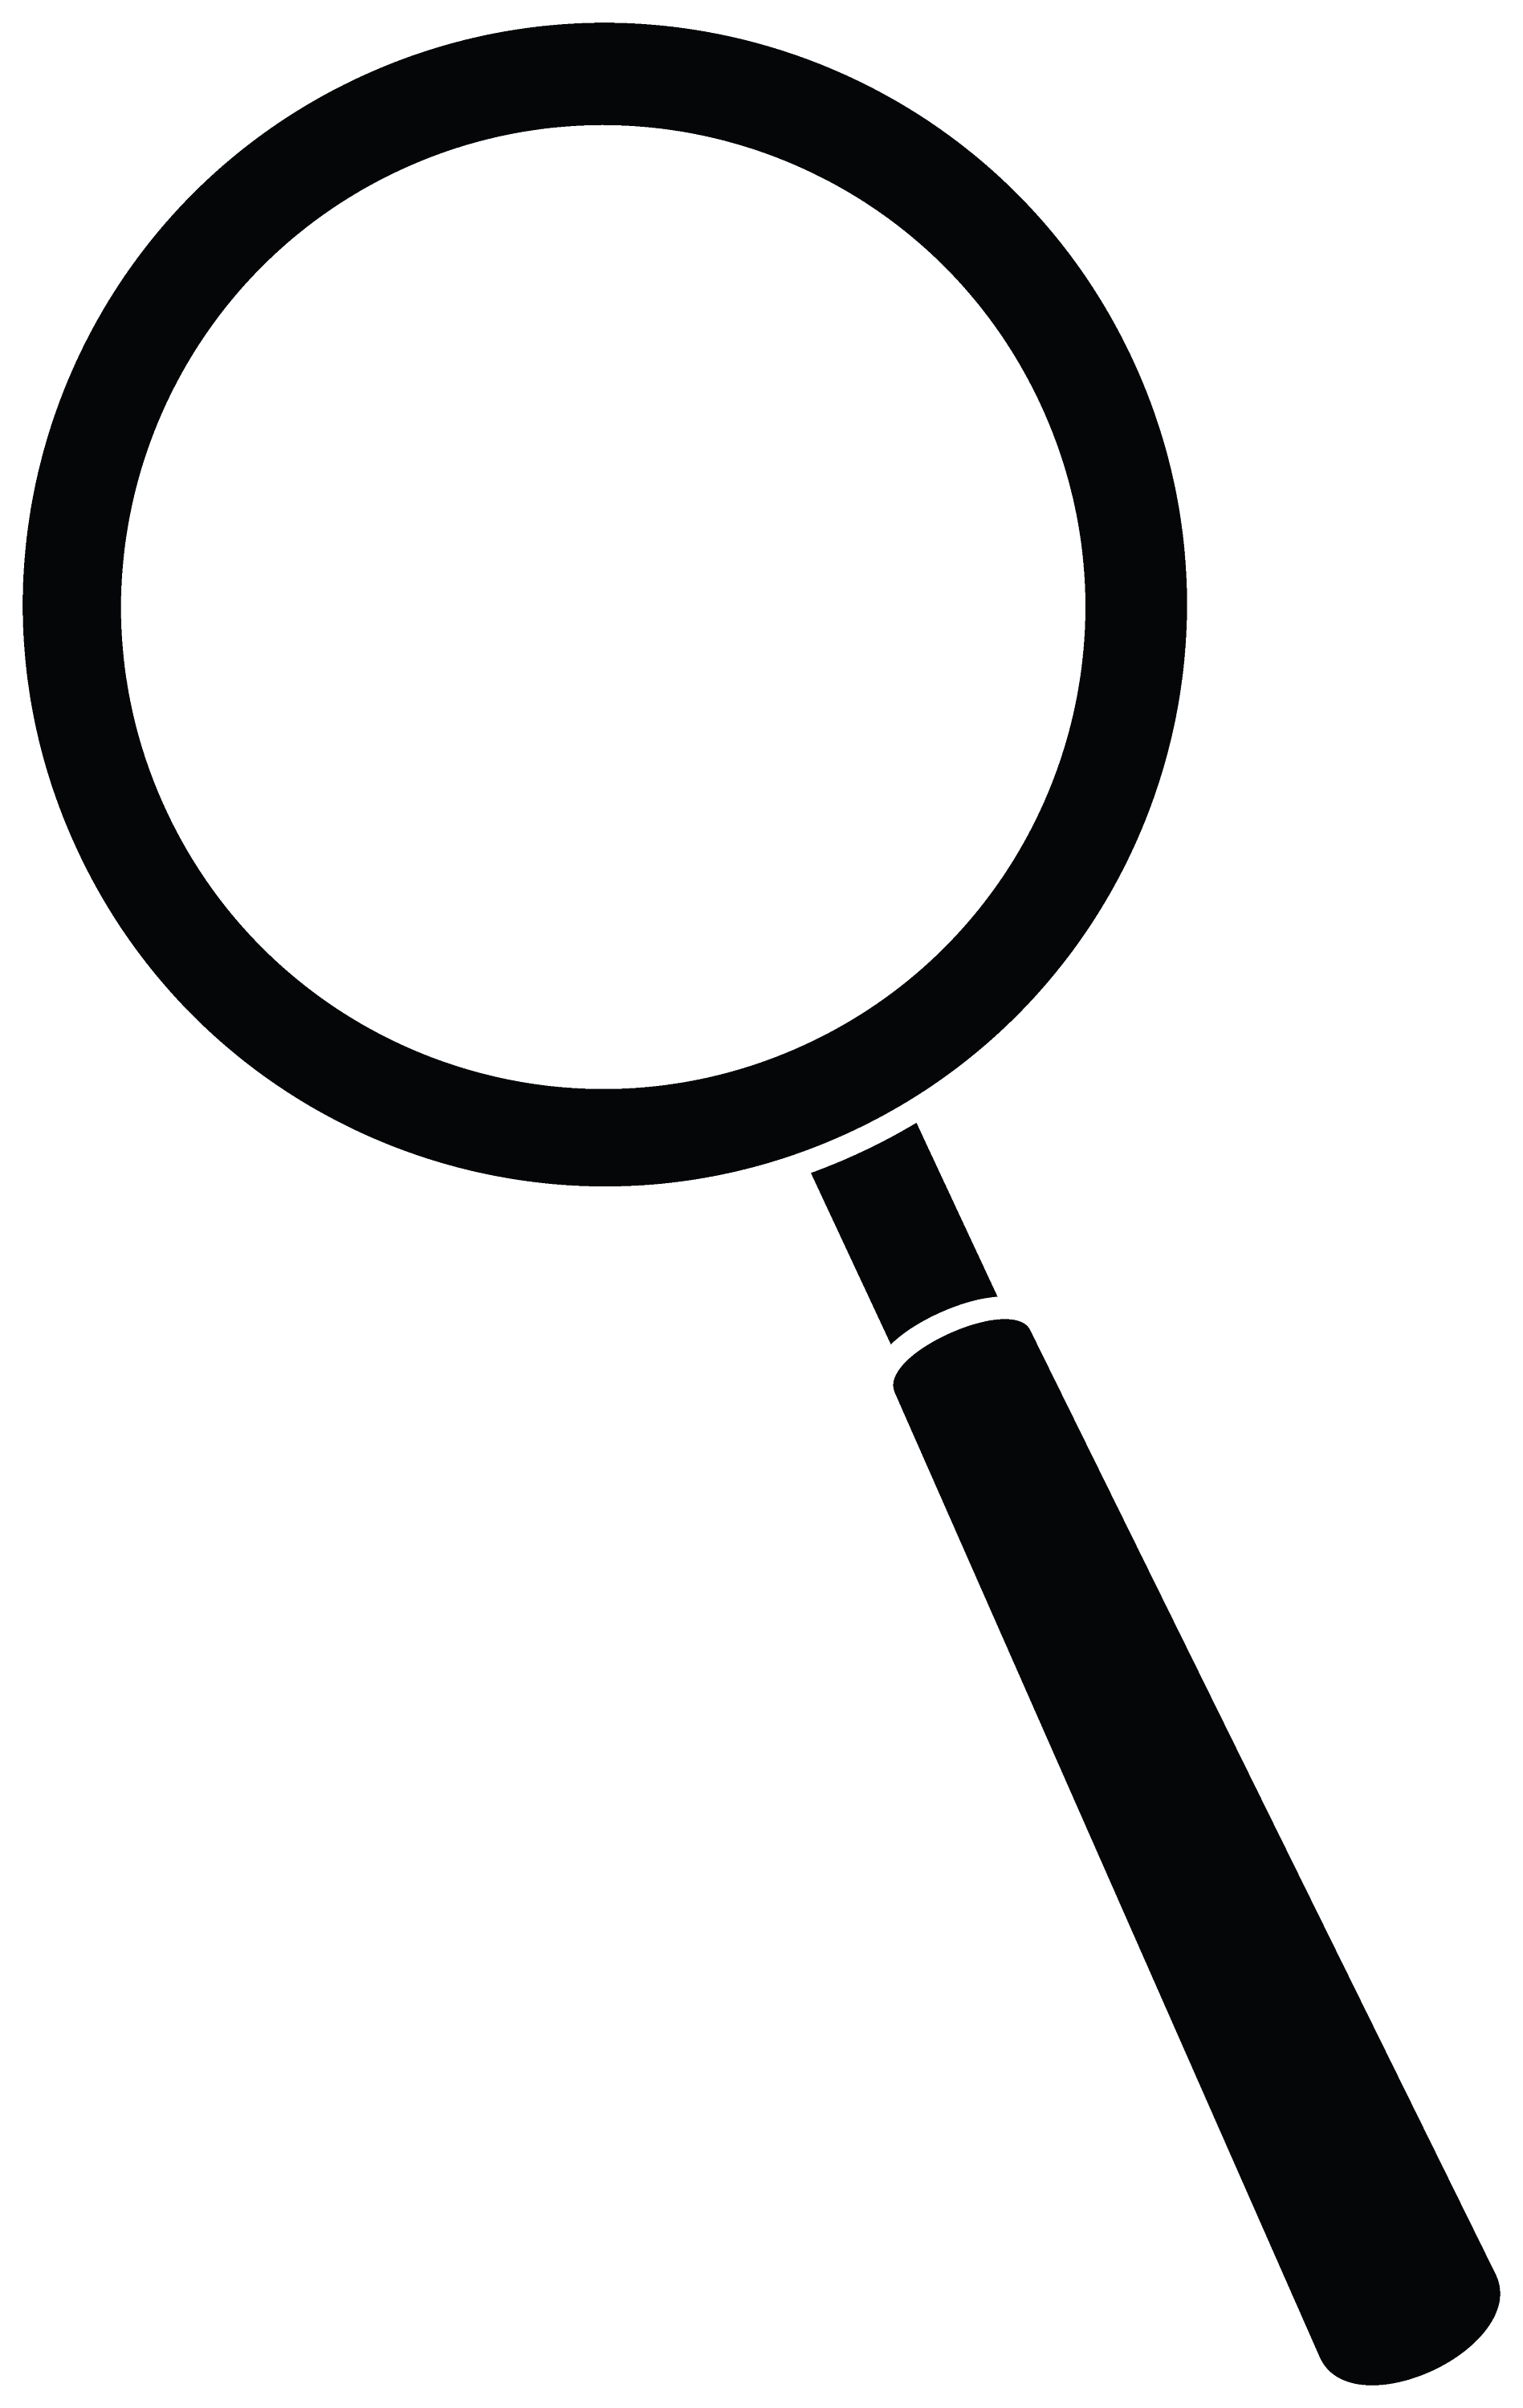 magnifying glass clipart black and white - photo #3